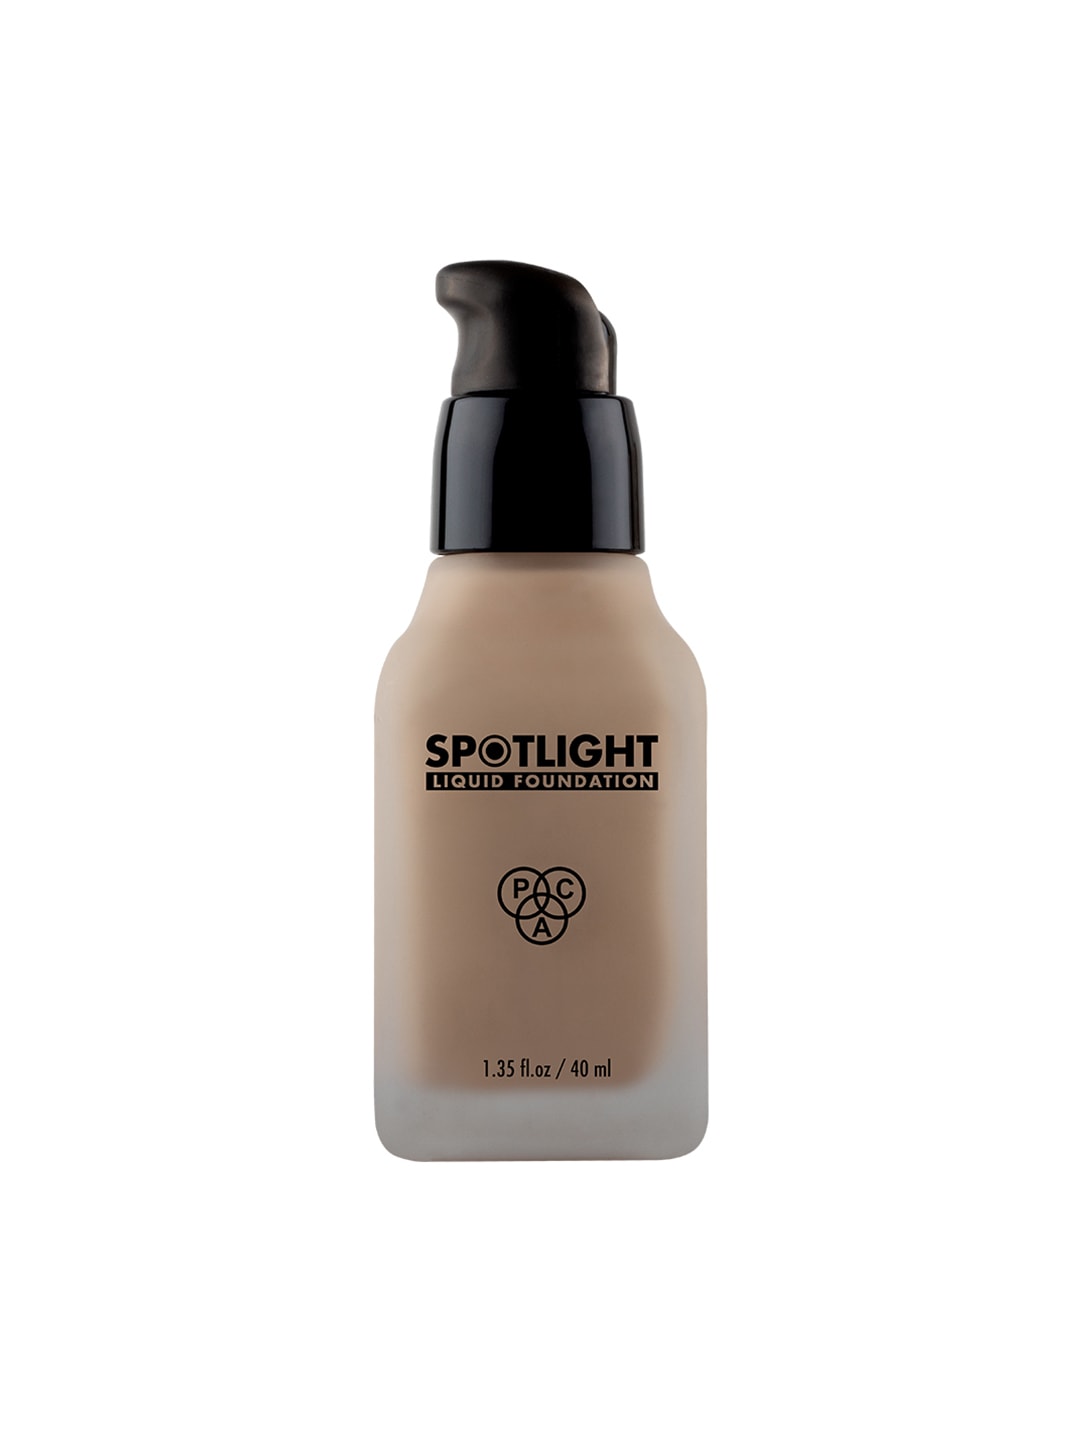 PAC Spotlight Waterproof Liquid Foundation with Hyaluronic Acid 40ml - Island White 04 Price in India